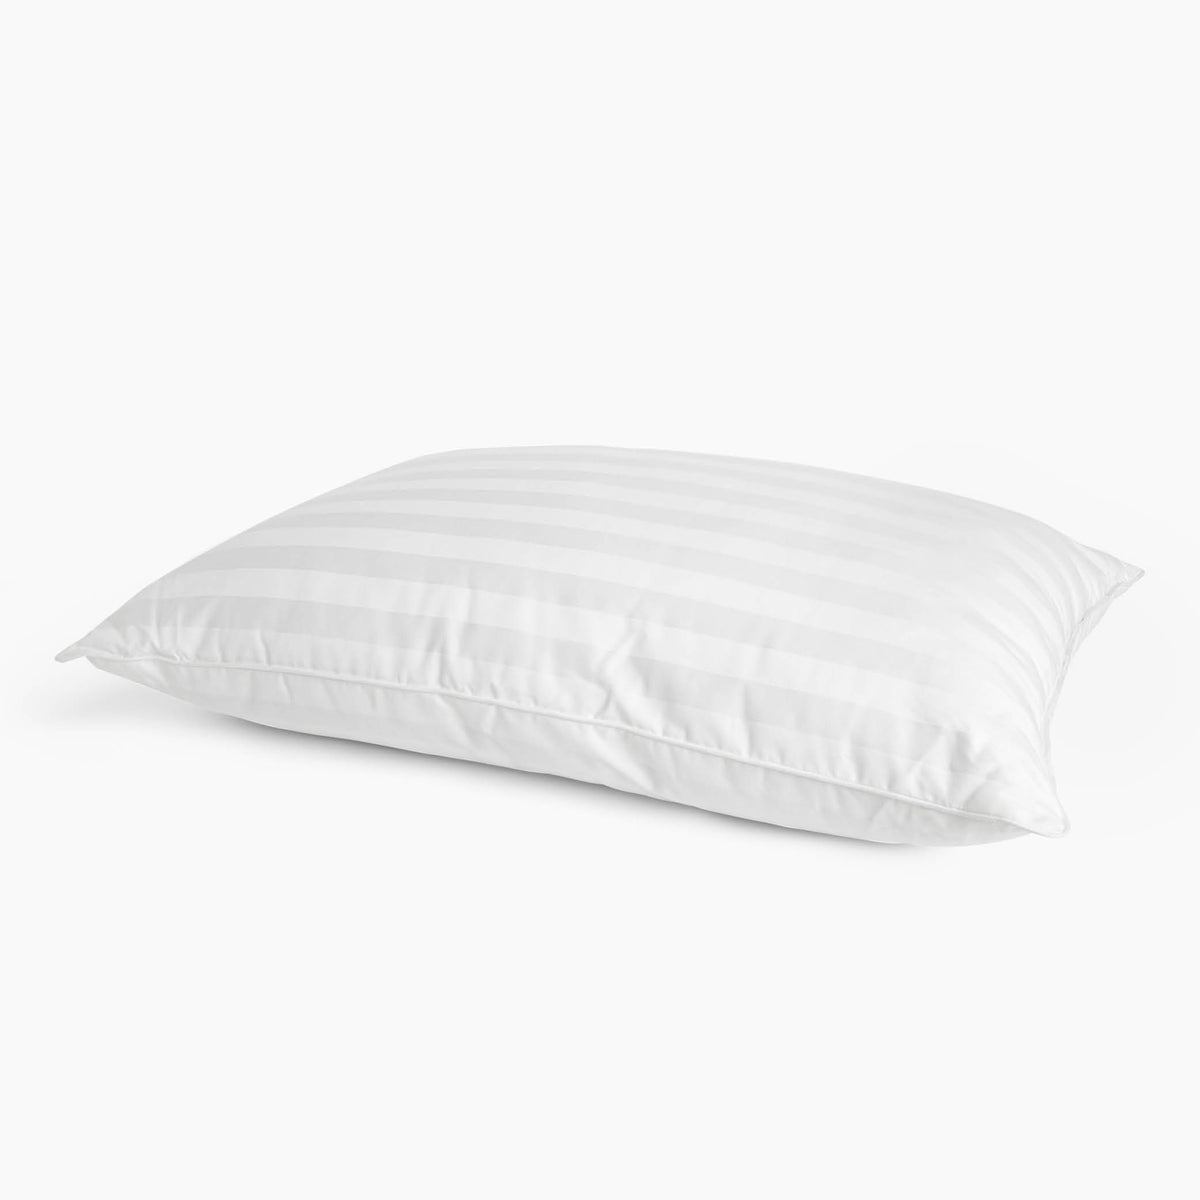 Image of Luxury Resort Hotel Collection Breathable Memory Fiber Pillow (low loft) on a white background